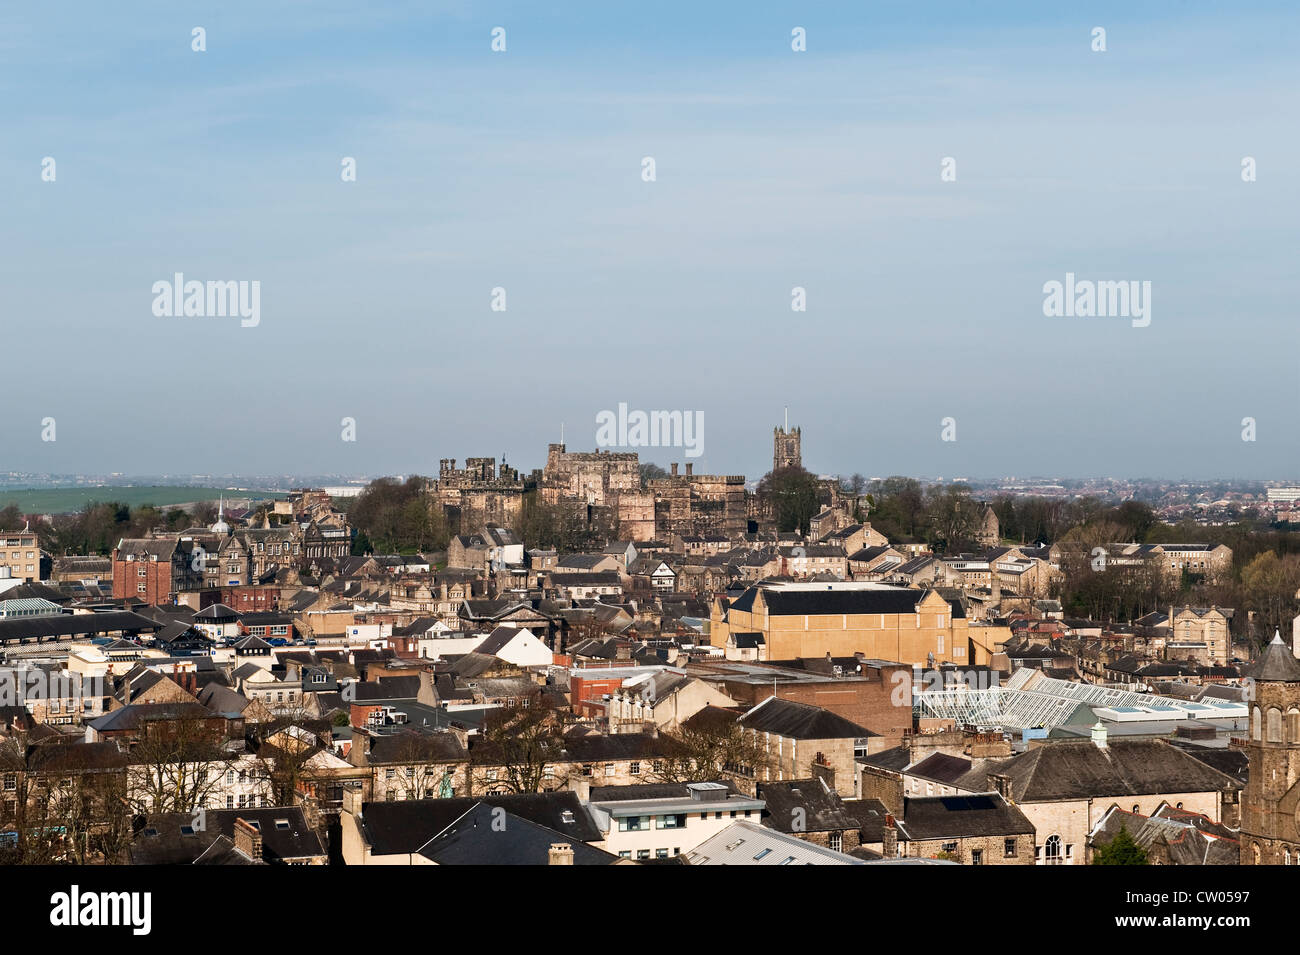 View over the city of Lancaster, UK, seen from the tower of St Peter's Cathedral, with the old prison of Lancaster Castle in the background Stock Photo